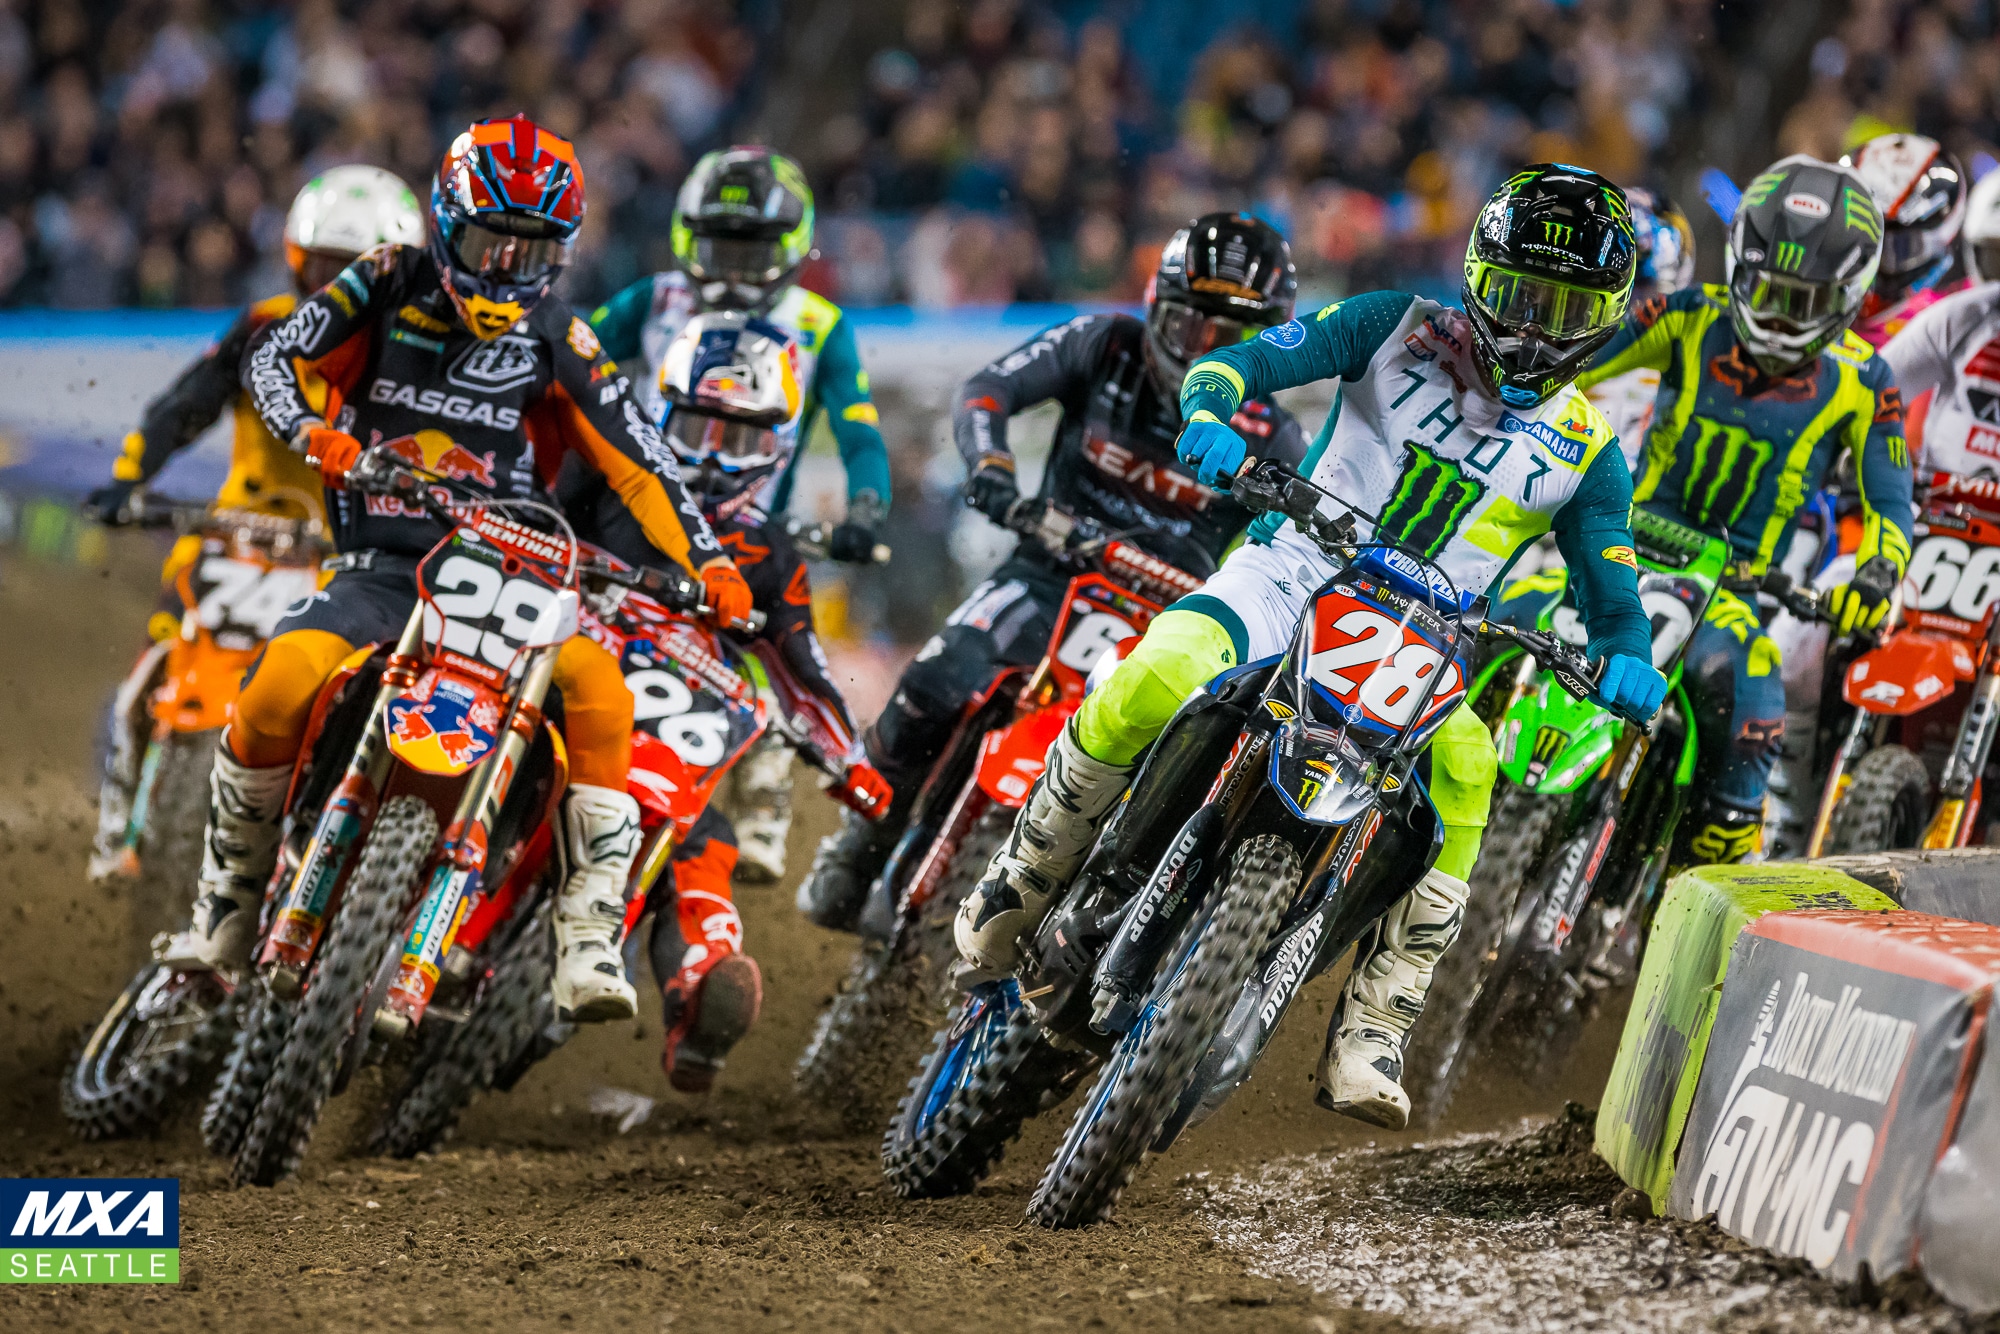 PEACOCK TO BE THE BIG PLAYER IN TELEVISING SUPERCROSS, THE NATIONALS AND SMX